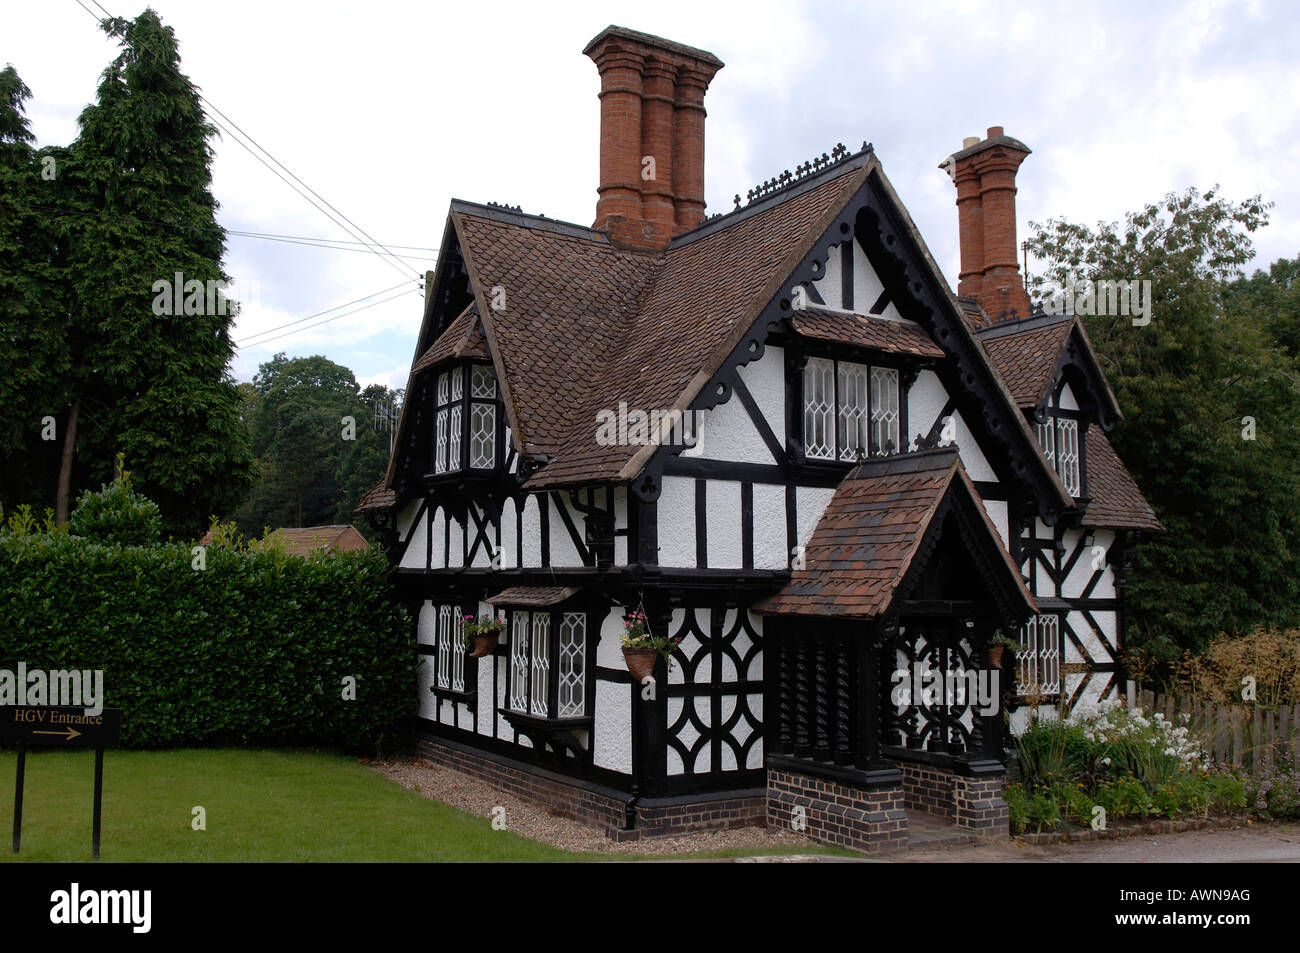 Old English Tudorbethan house with two chimneys, part of Ragley Hall, Alcester, Warwickshire, West Midlands, England, Europe Stock Photo